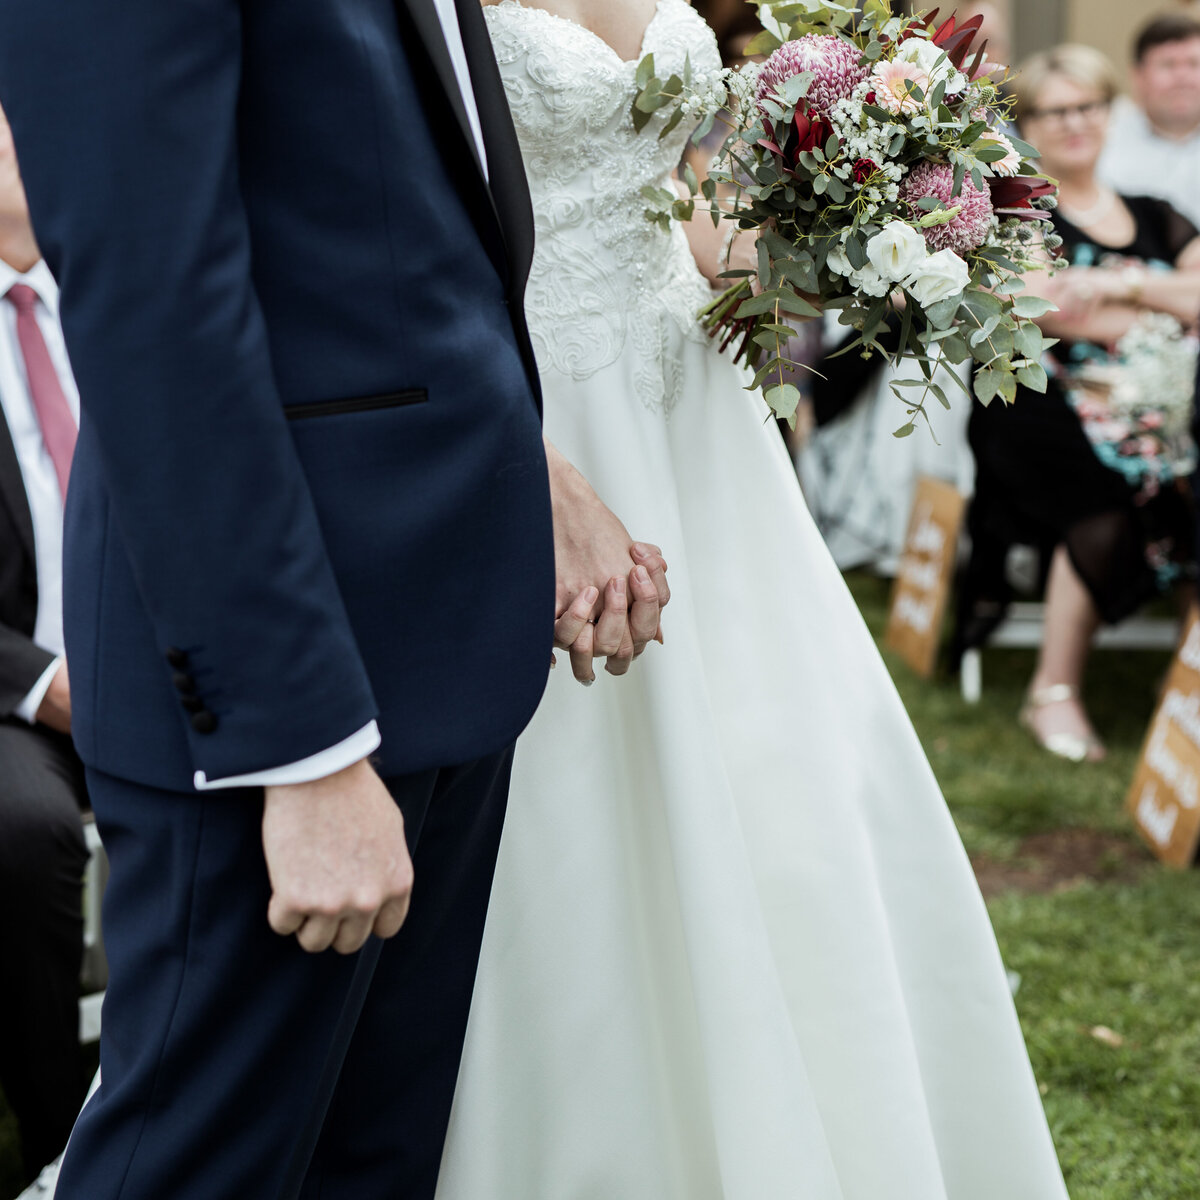 M&R-Anderson-Hill-Rexvil-Photography-Adelaide-Wedding-Photographer-366